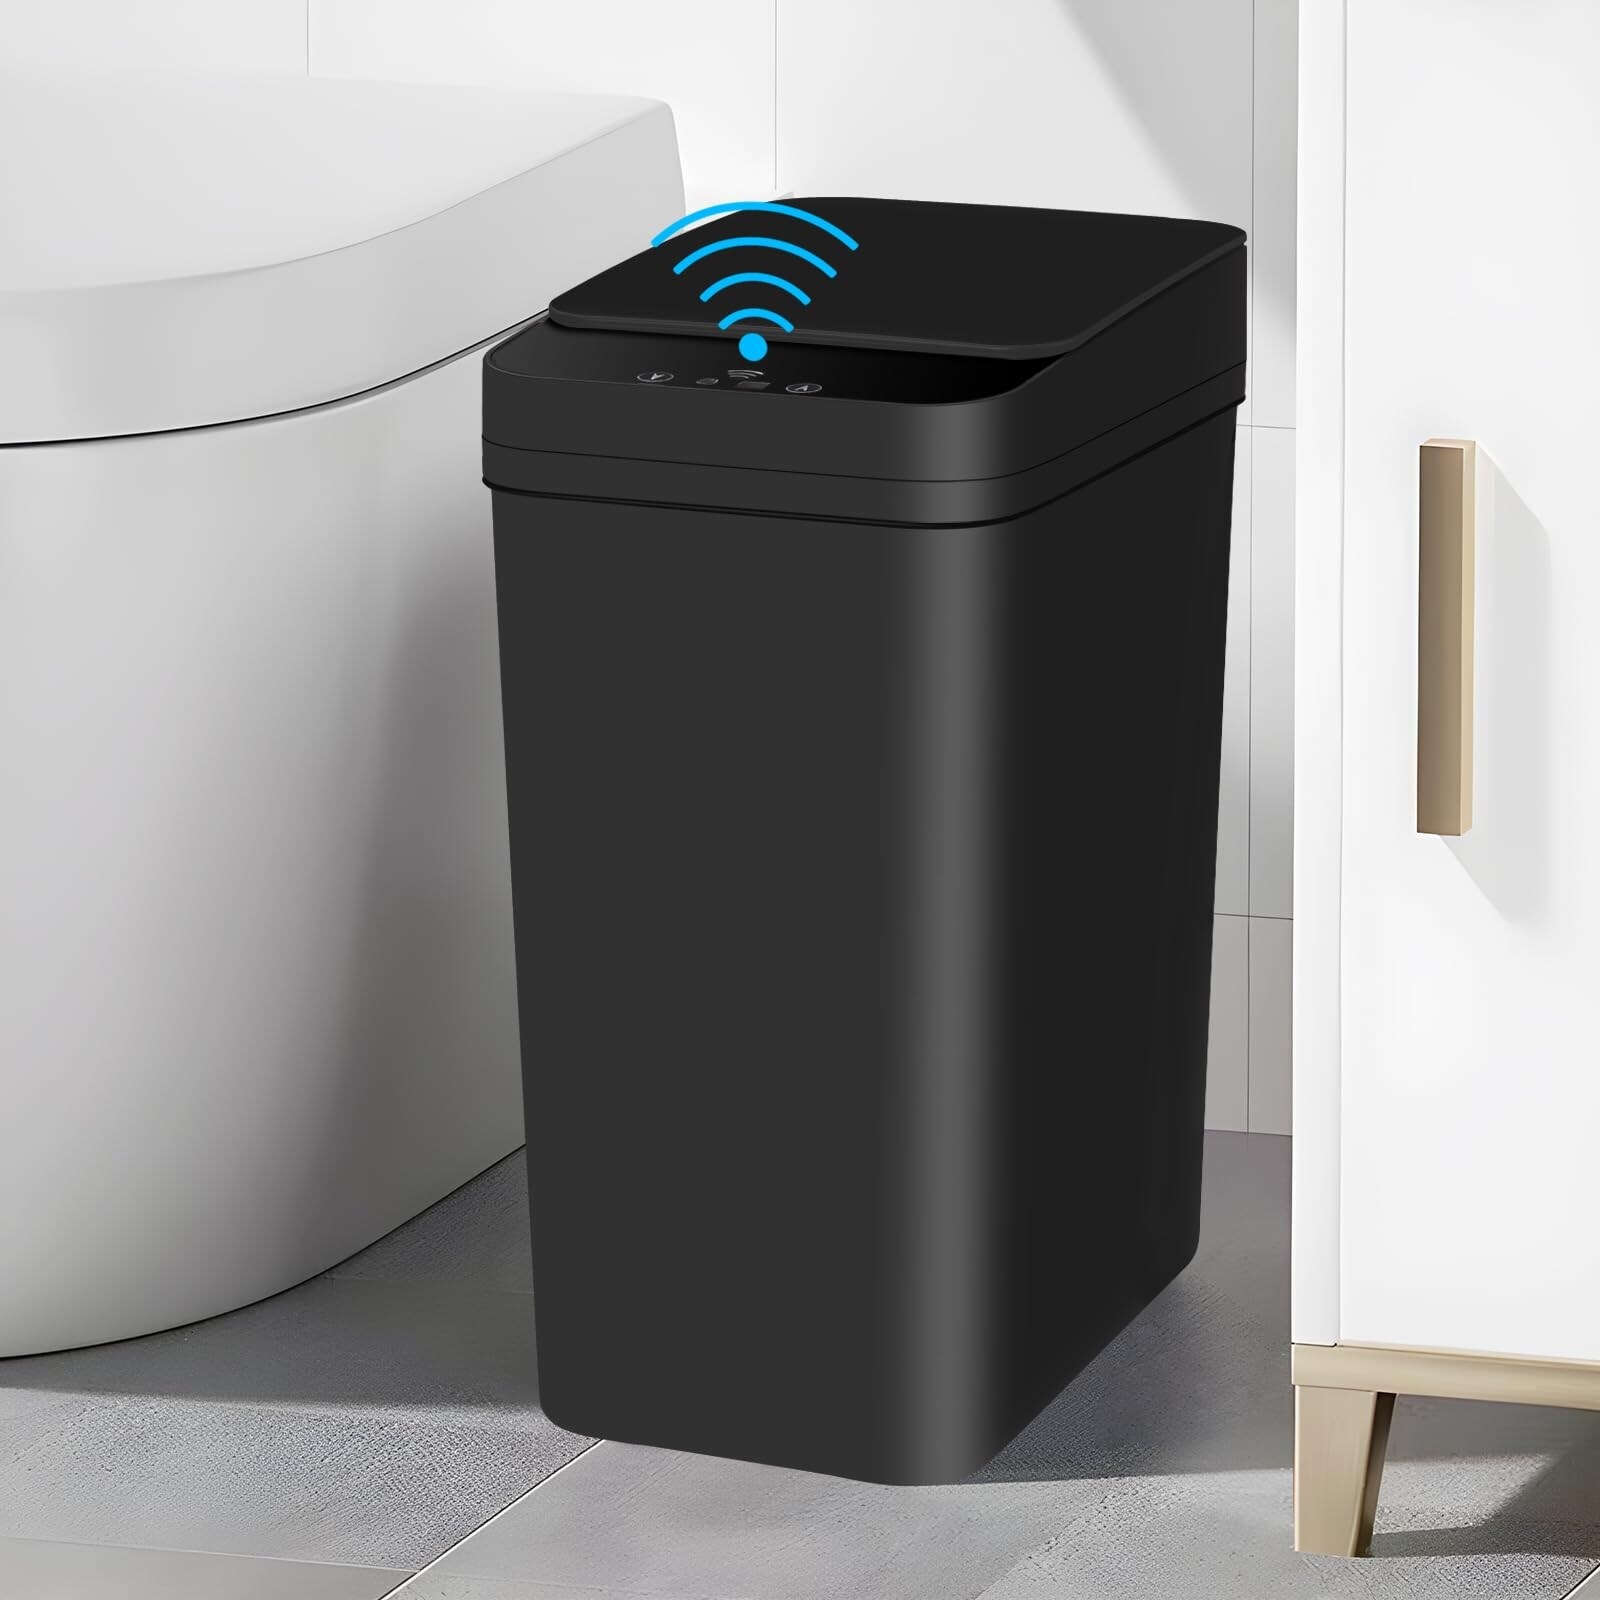 https://ak1.ostkcdn.com/images/products/is/images/direct/57882337f112803bf96852c1f863b061b1d7ae1a/Bathroom-Automatic-Trash-Can%2C-4-Gallon-Touchless-Motion-Sensor-Garbage-Can-with-Lid-Smart-Electric-Plastic-Narrow-Garbage-Bin.jpg